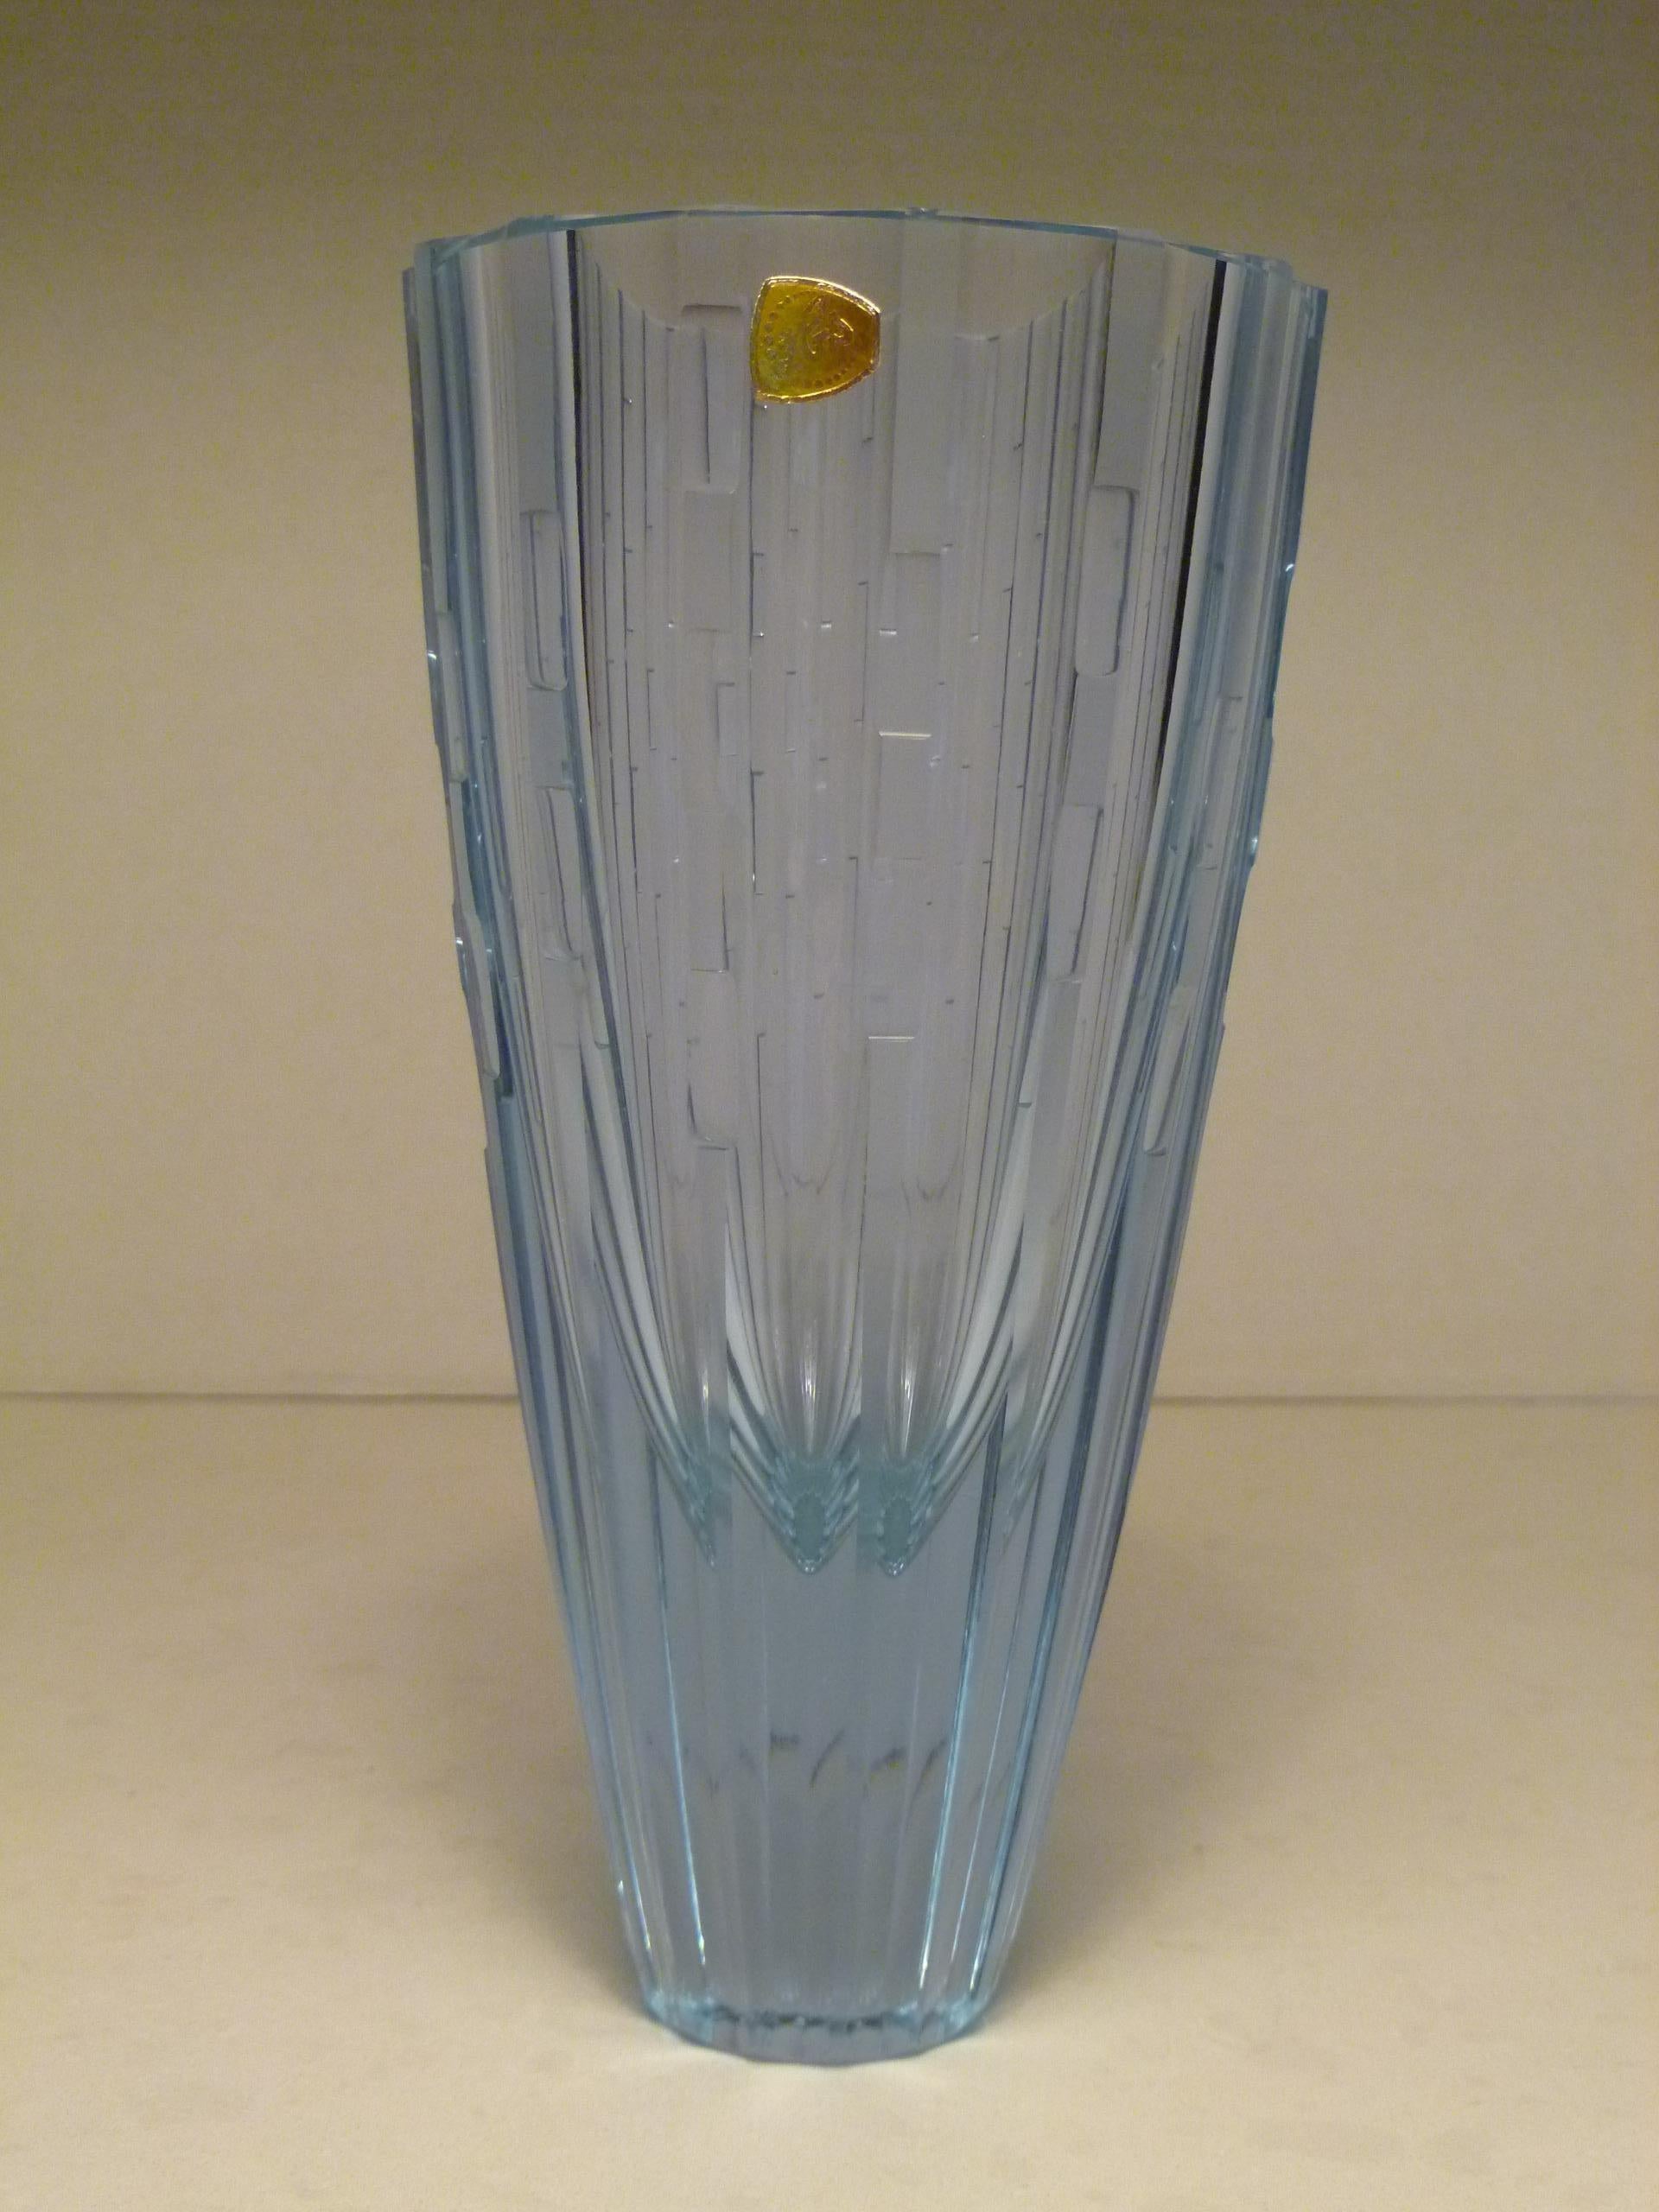 Fascinating 1960s Neodymiun crystal vase, sometimes called Alexandrite, by Zeleznobrodské Sklo Glassworks, ZBS, in Zelesny Brod, Czechoslovakia. Masterful scalloped rib design with vertical rectangular cuts. Neodymiun dye compounds began to be added